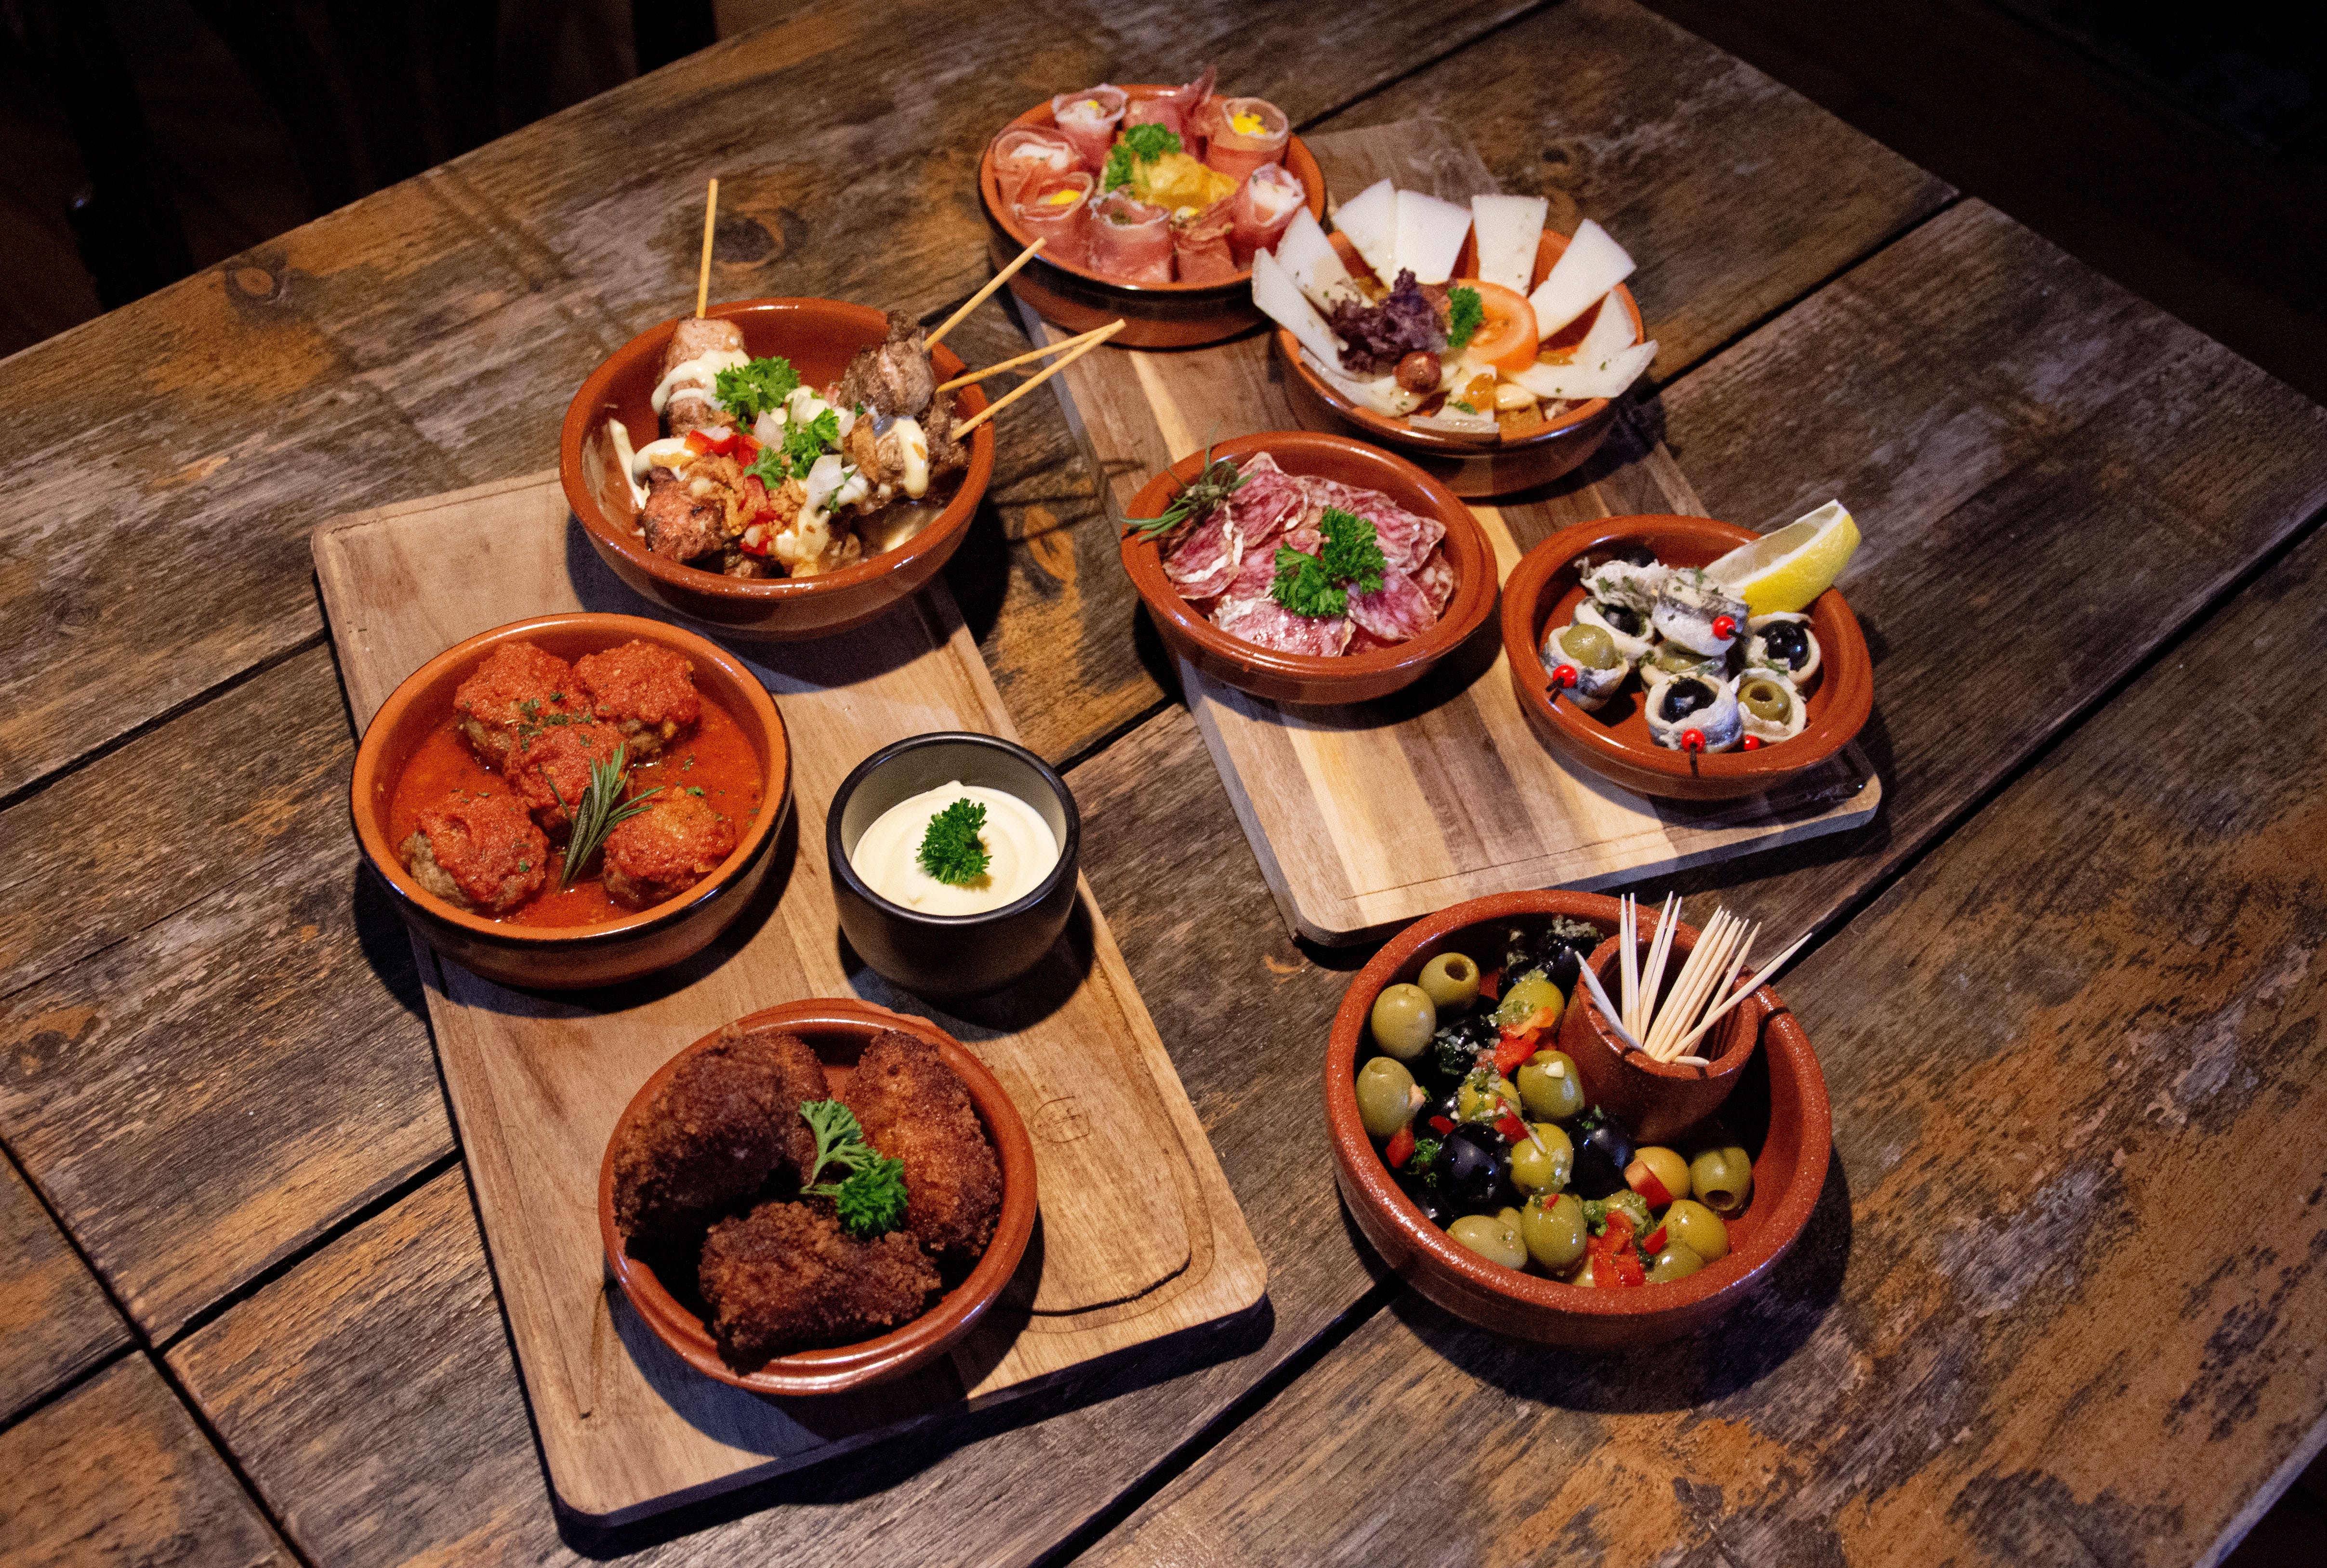 Meet Friends for Tapas at These Boston Restaurants